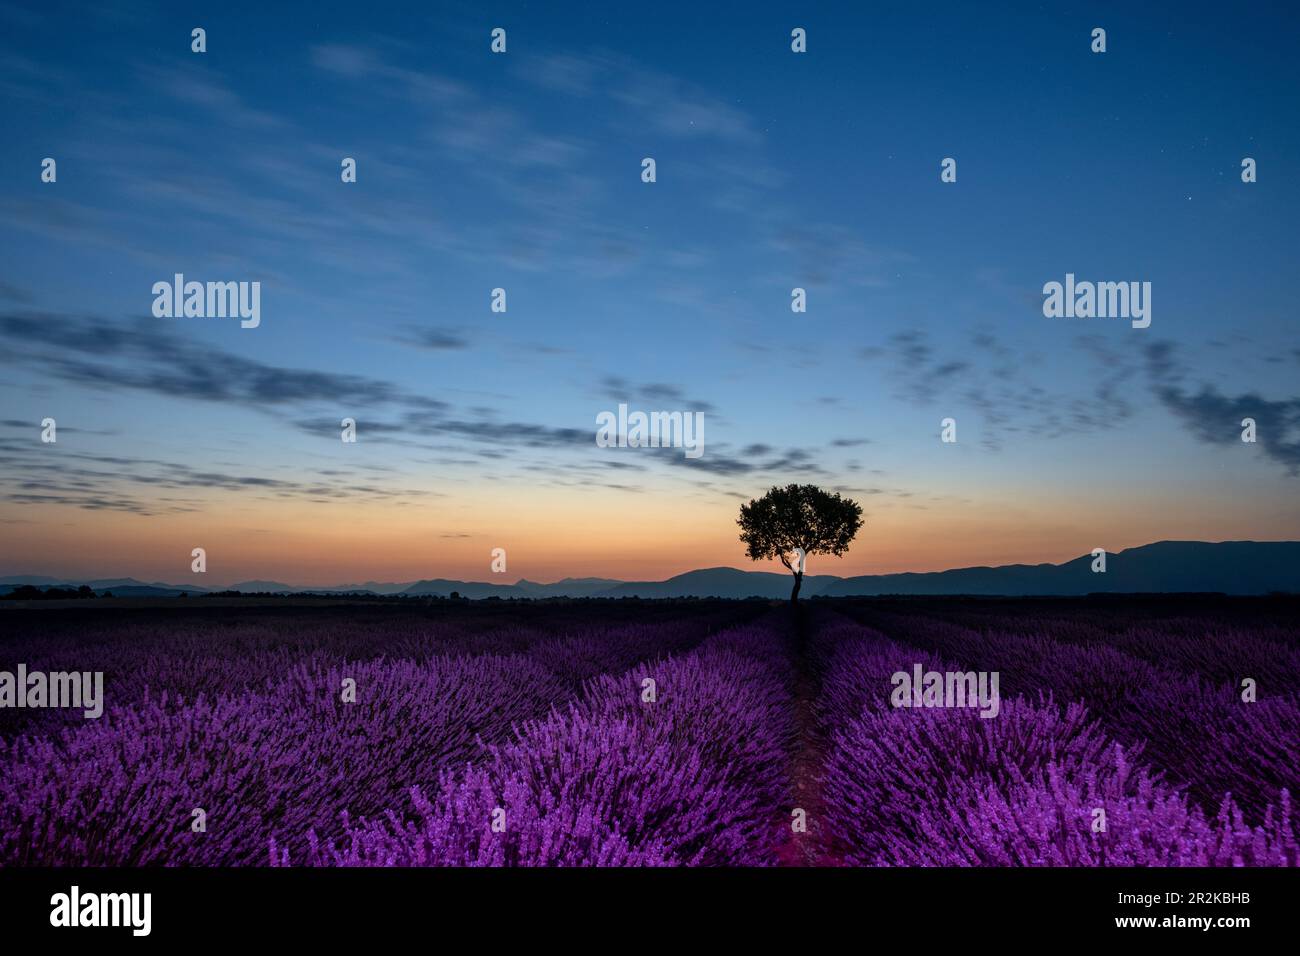 Fields of lavender in full bloom under a full moon in the Valensole plateau with mature tree standing solo. Stock Photo